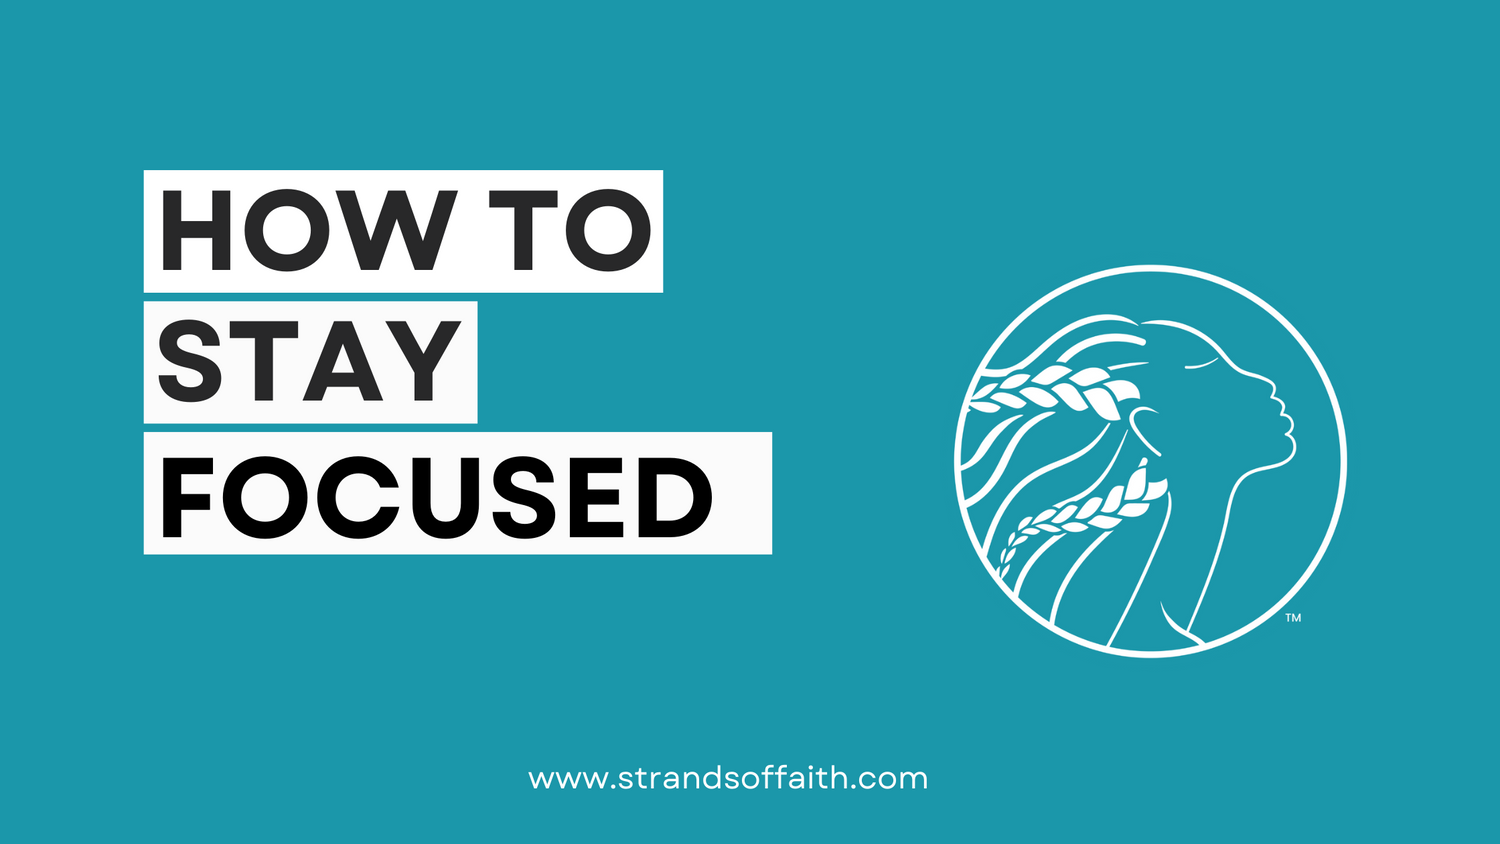 How to stay focused blog cover image